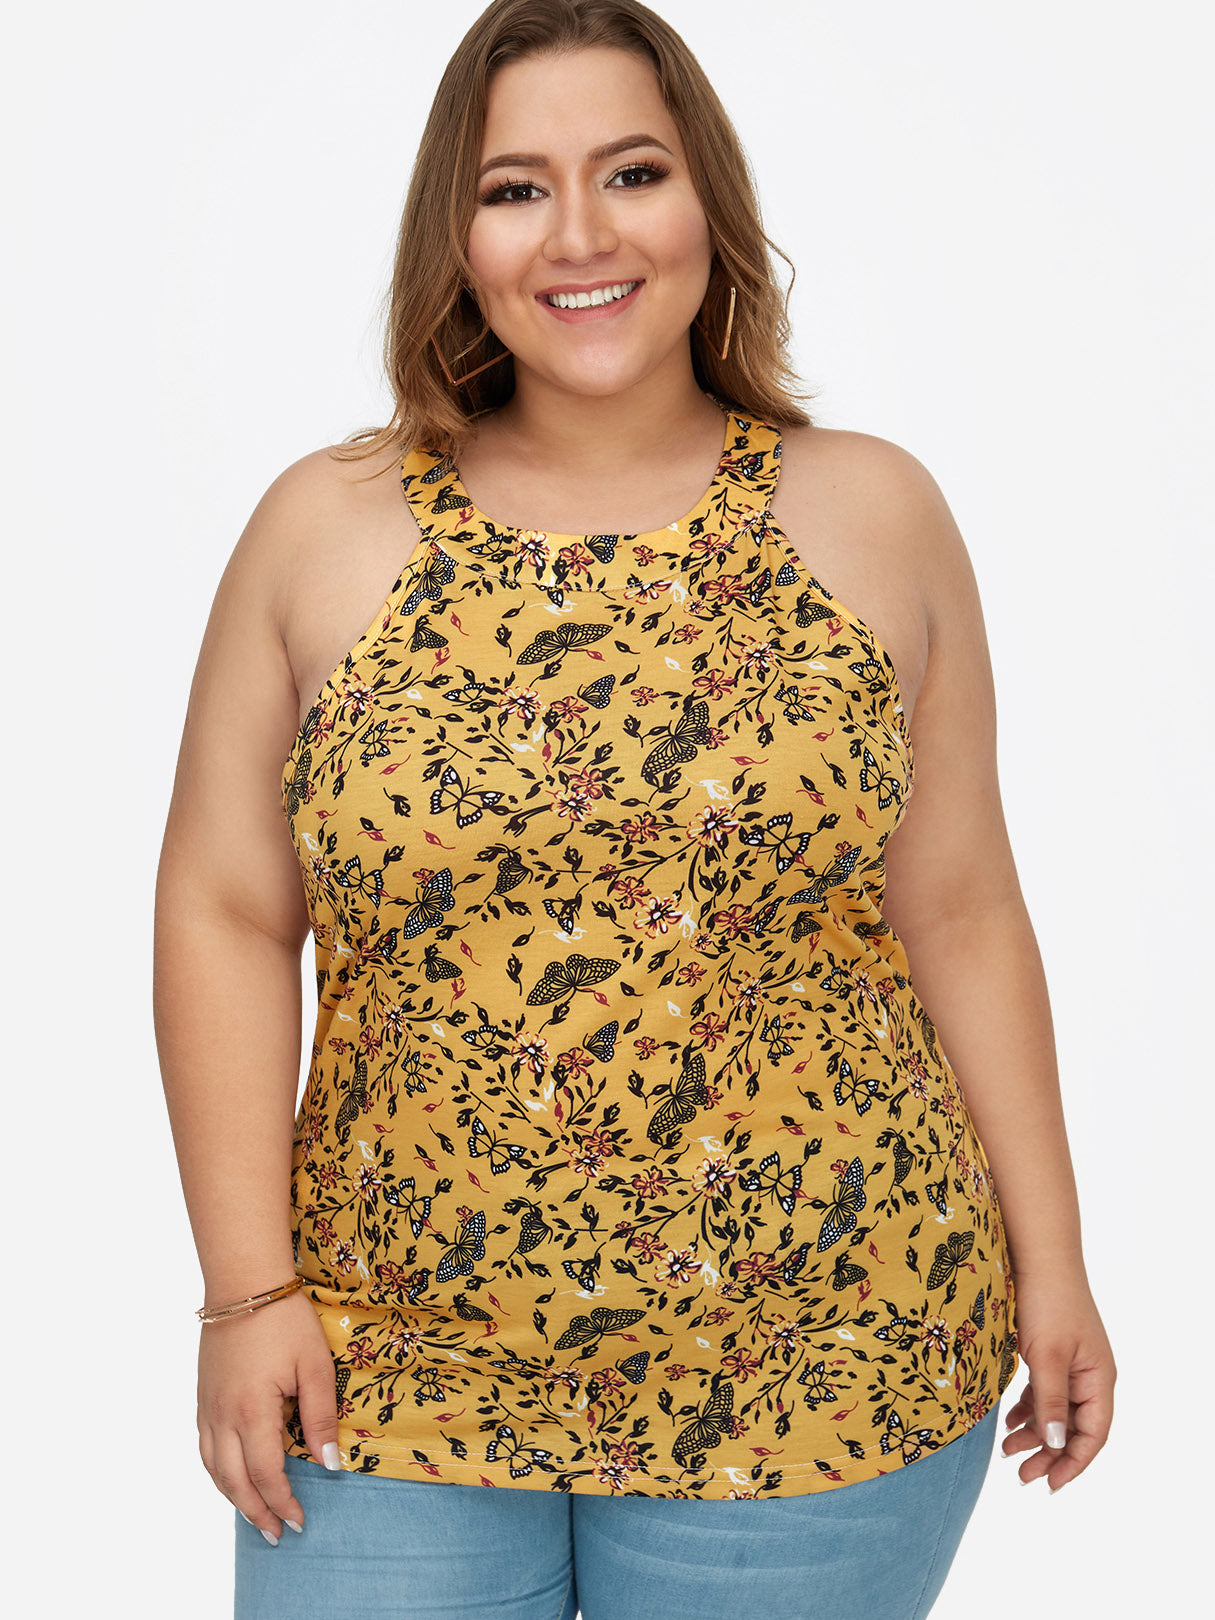 Wholesale Round Neck Floral Print Calico Cut Out Sleeveless Yellow Plus Size Tops